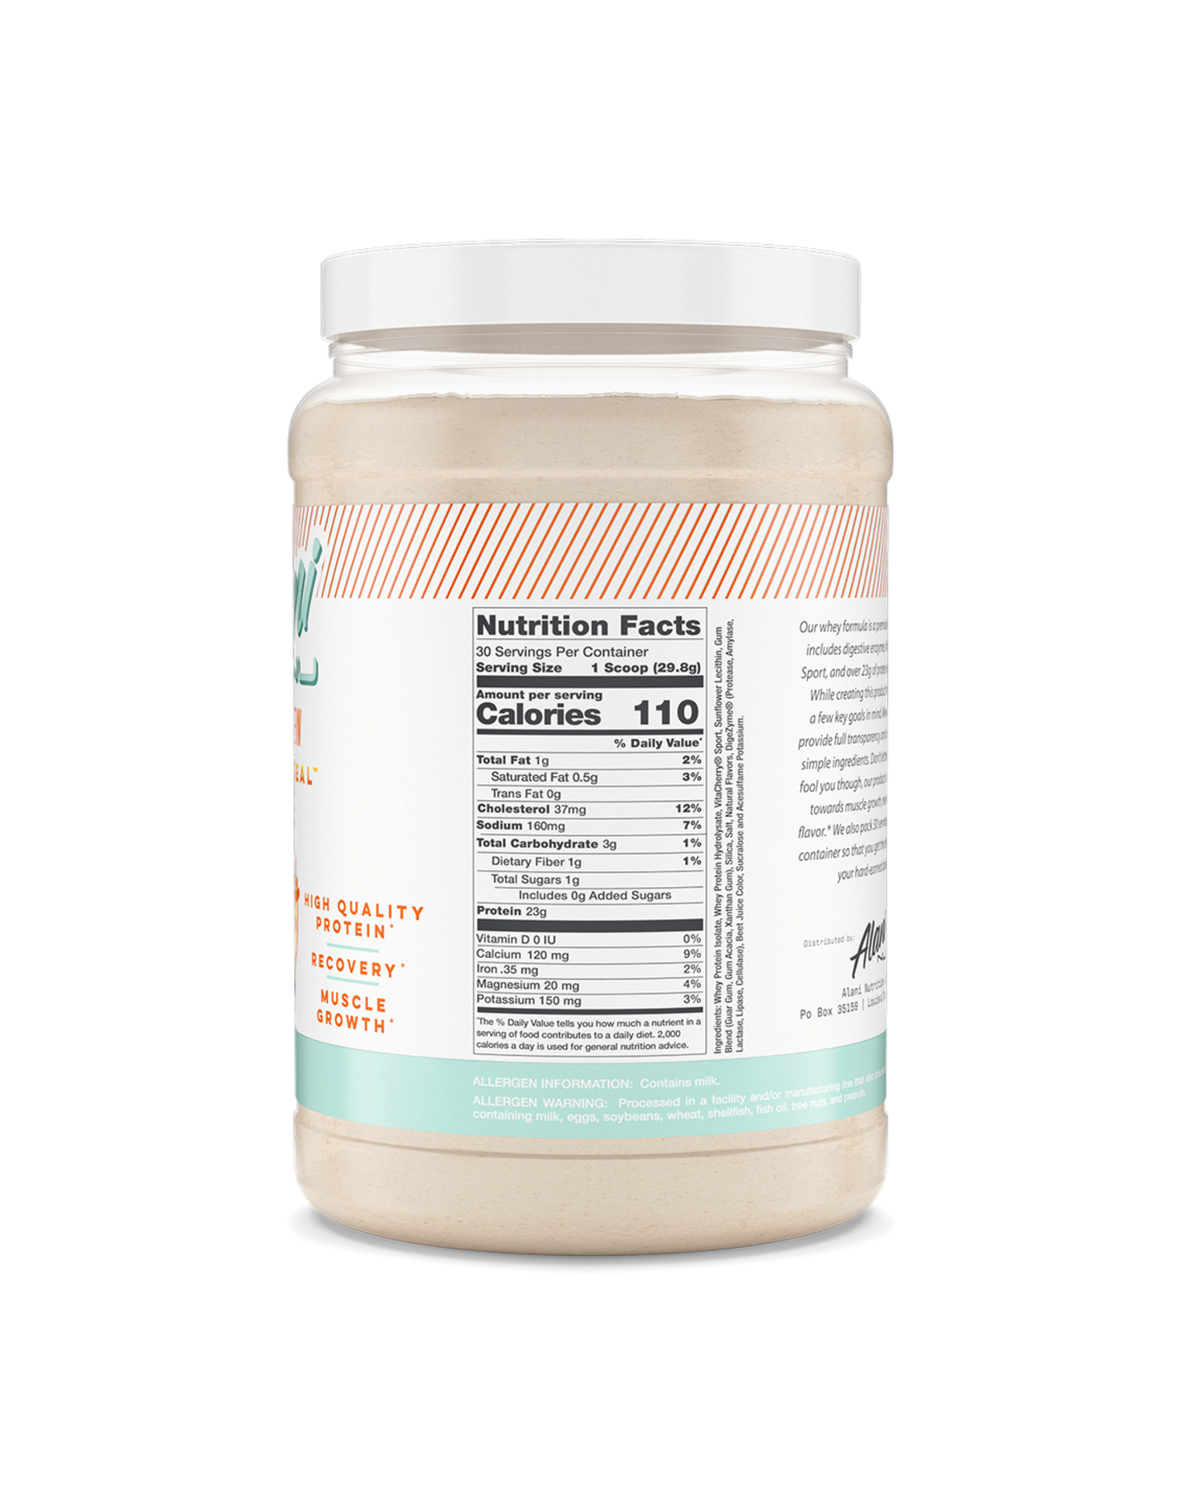 A back view of Whey Protein in Confetti Cake flavor highlighting nutrition facts.